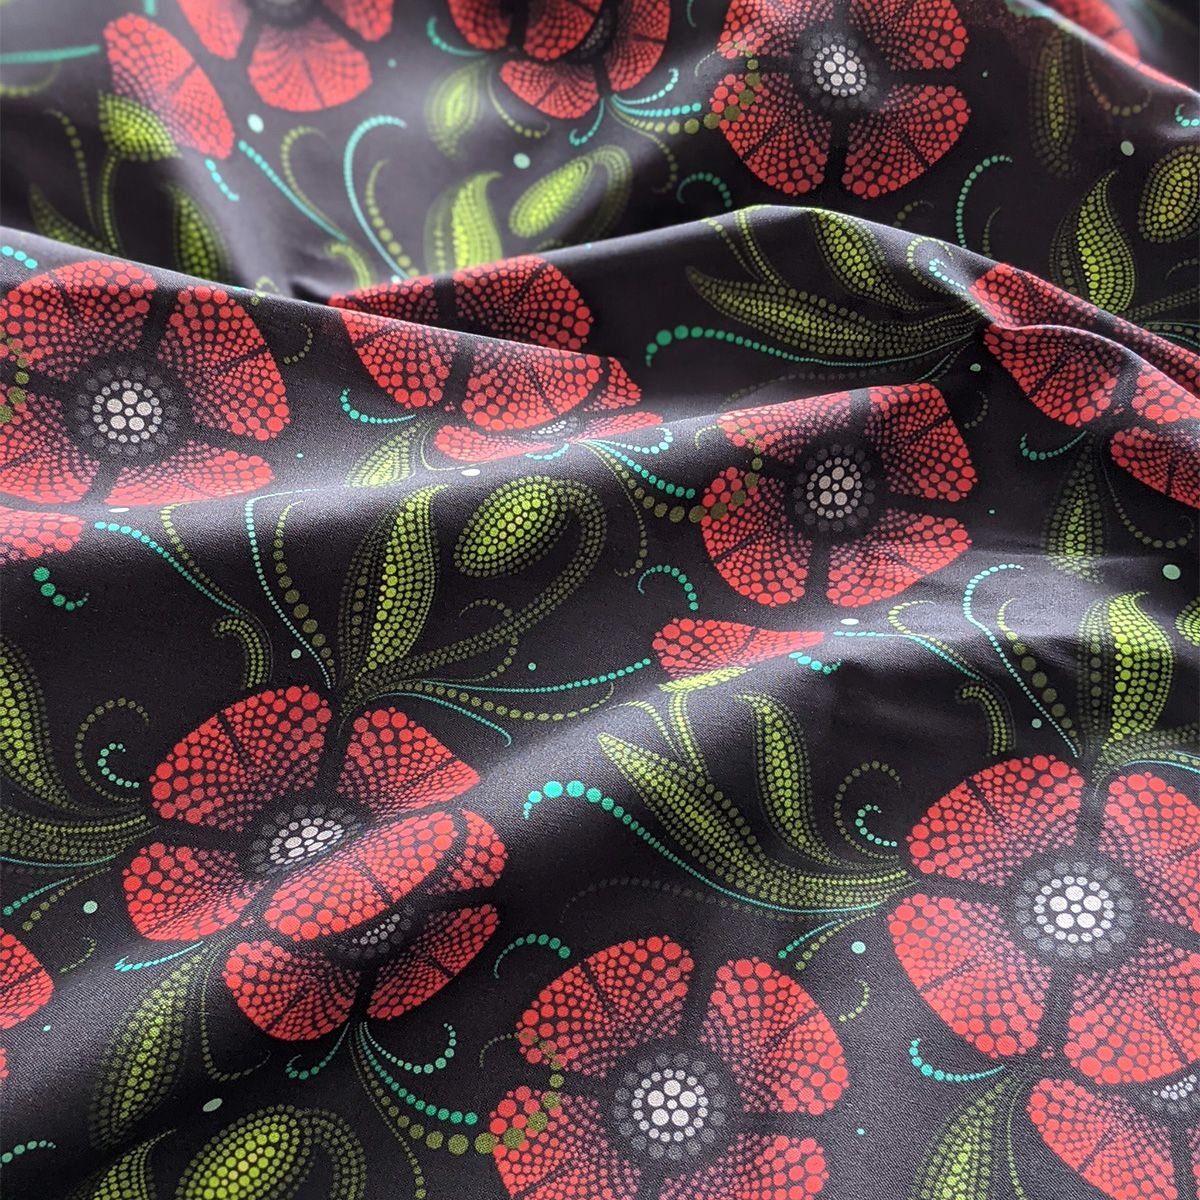 Indigenous Nouveau fabric featuring stylized red poppies on a black background